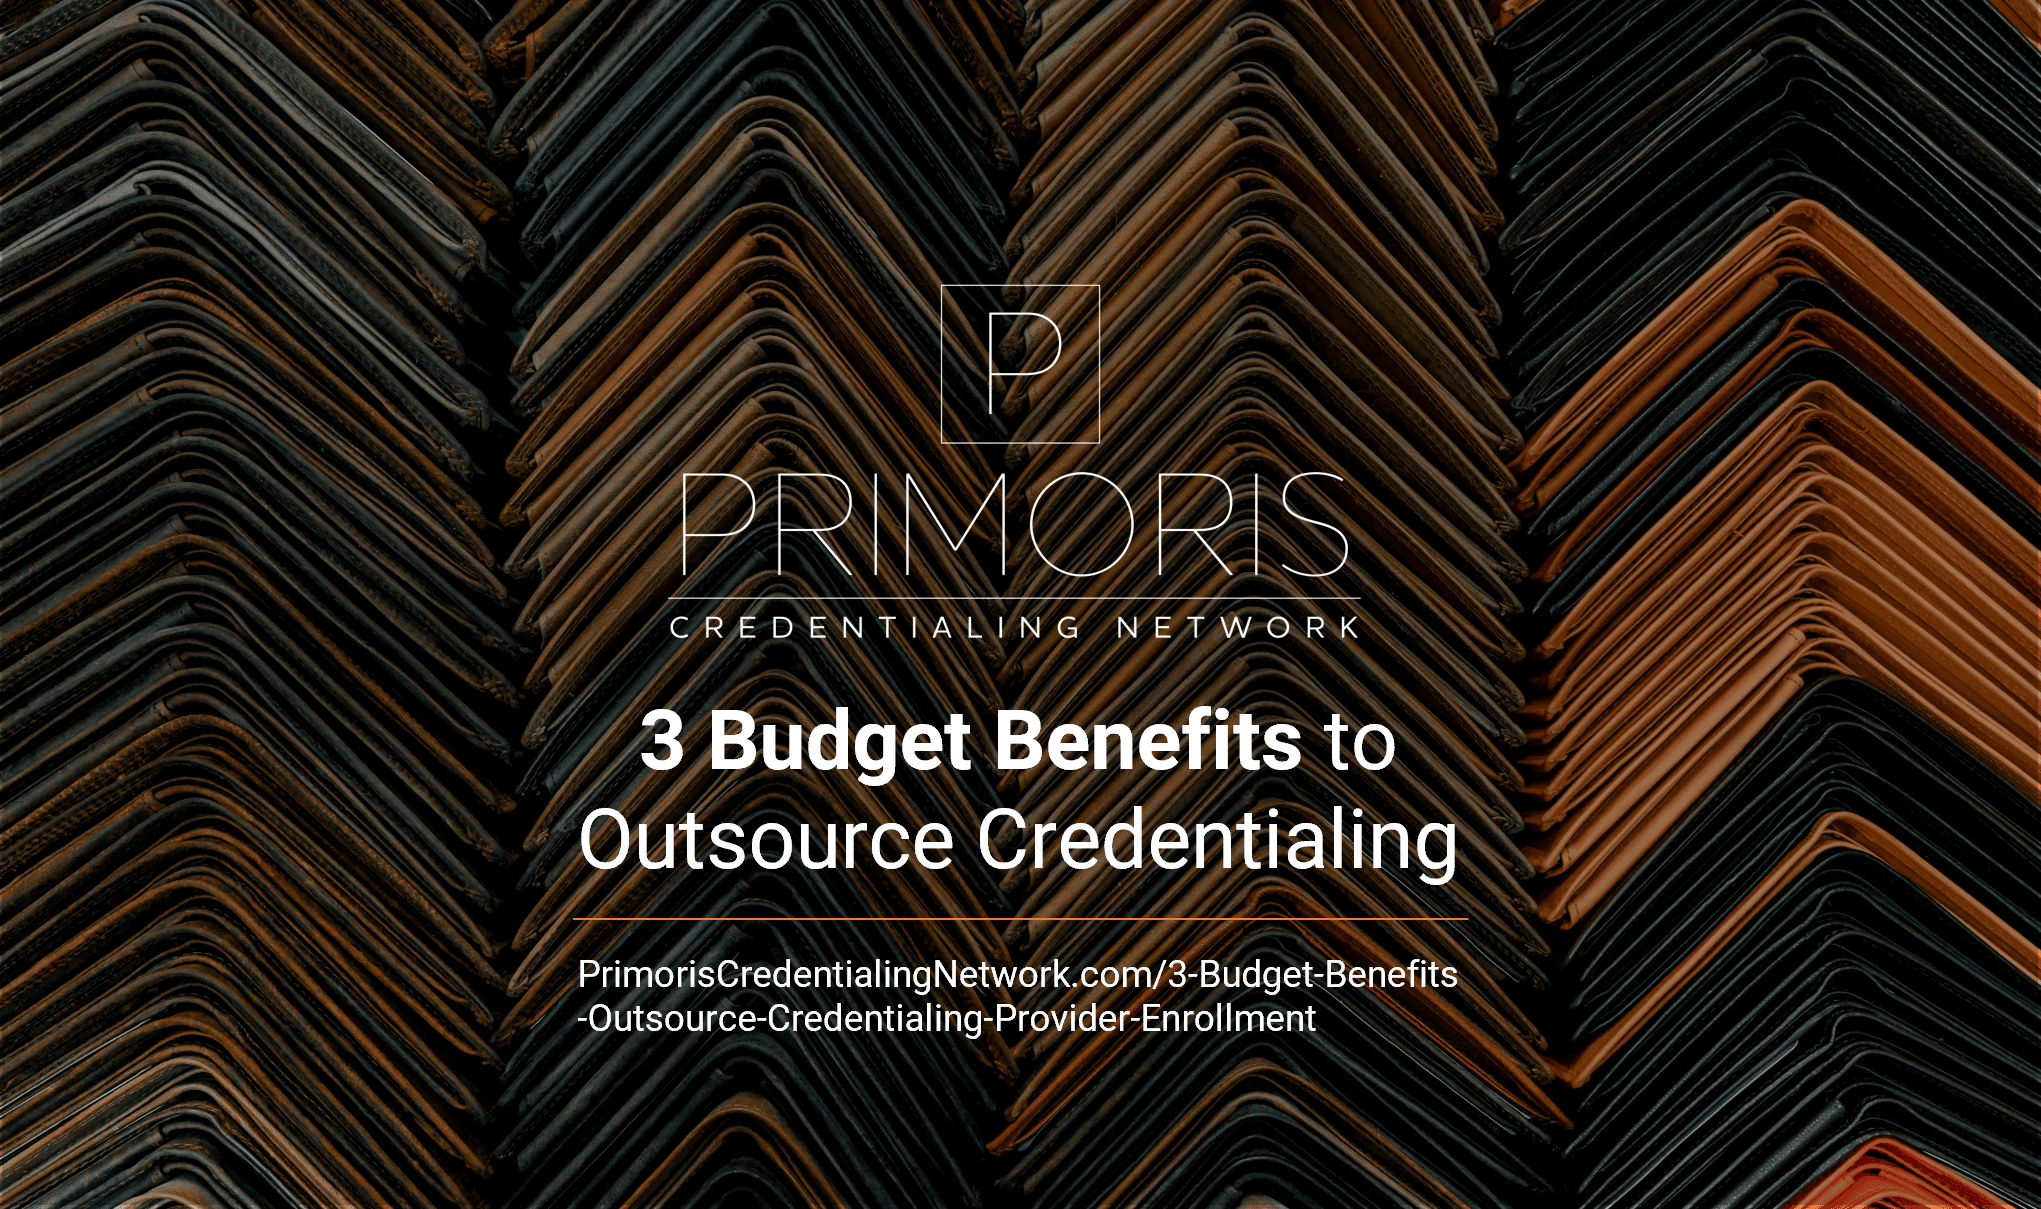 3 Budget Benefits To Outsource Credentialing